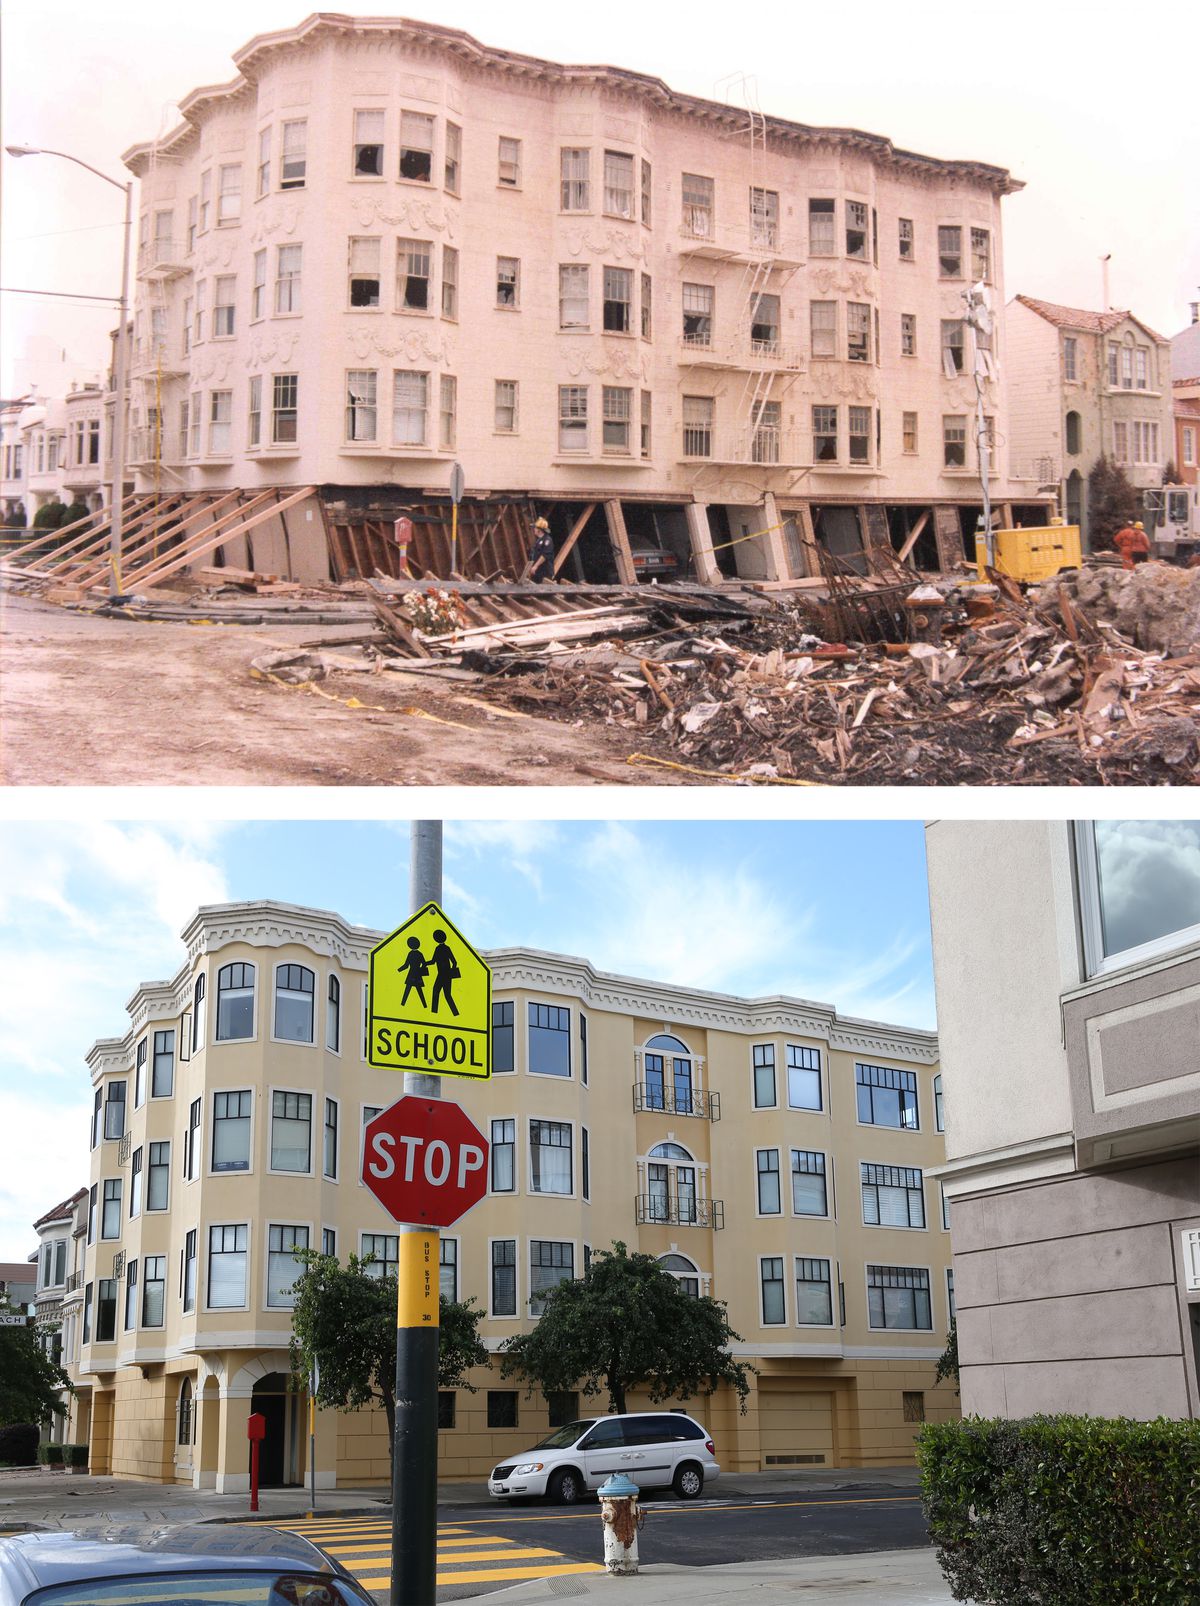 25 Years Since The Bay Area Earthquake: Then And Now